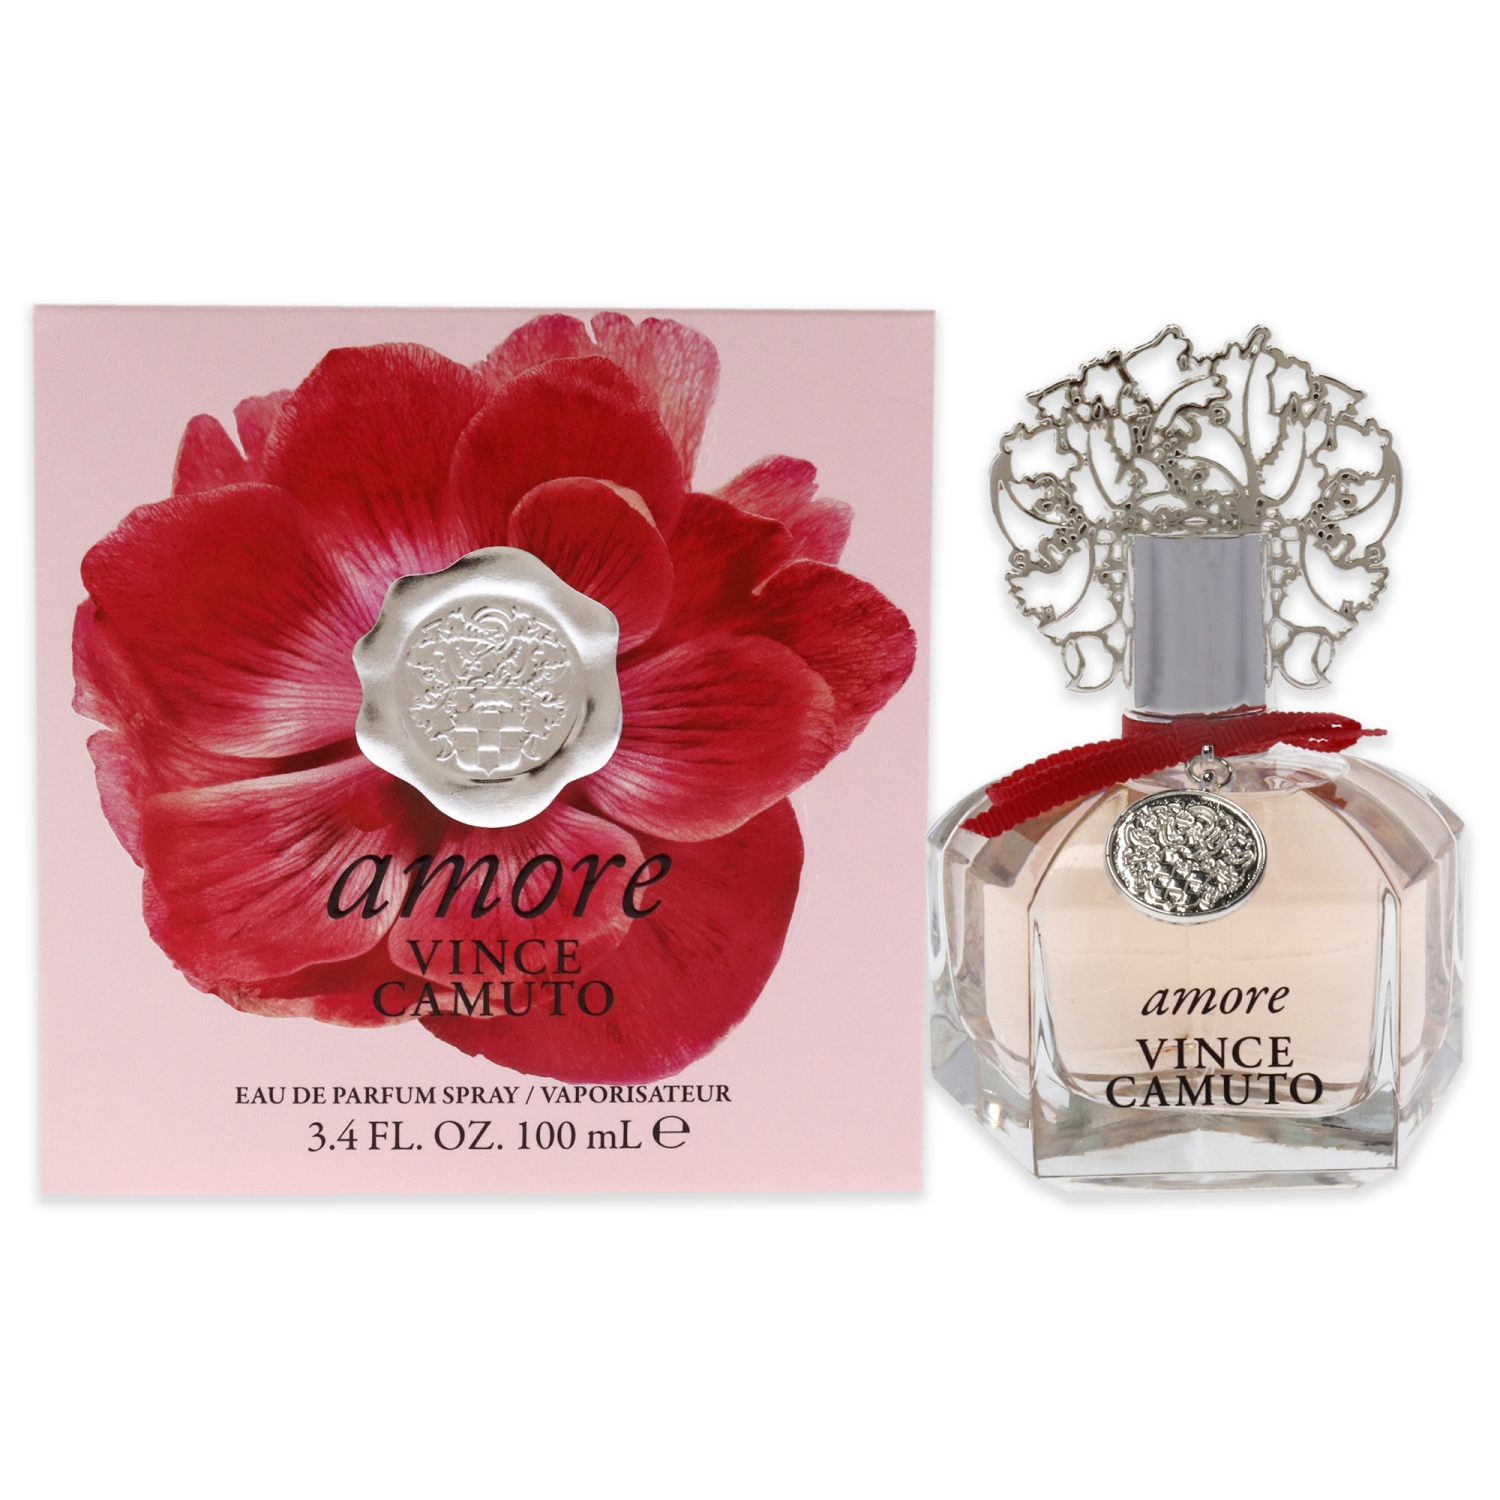 Vince Camuto Amore by Vince Camuto Body Mist 8 oz